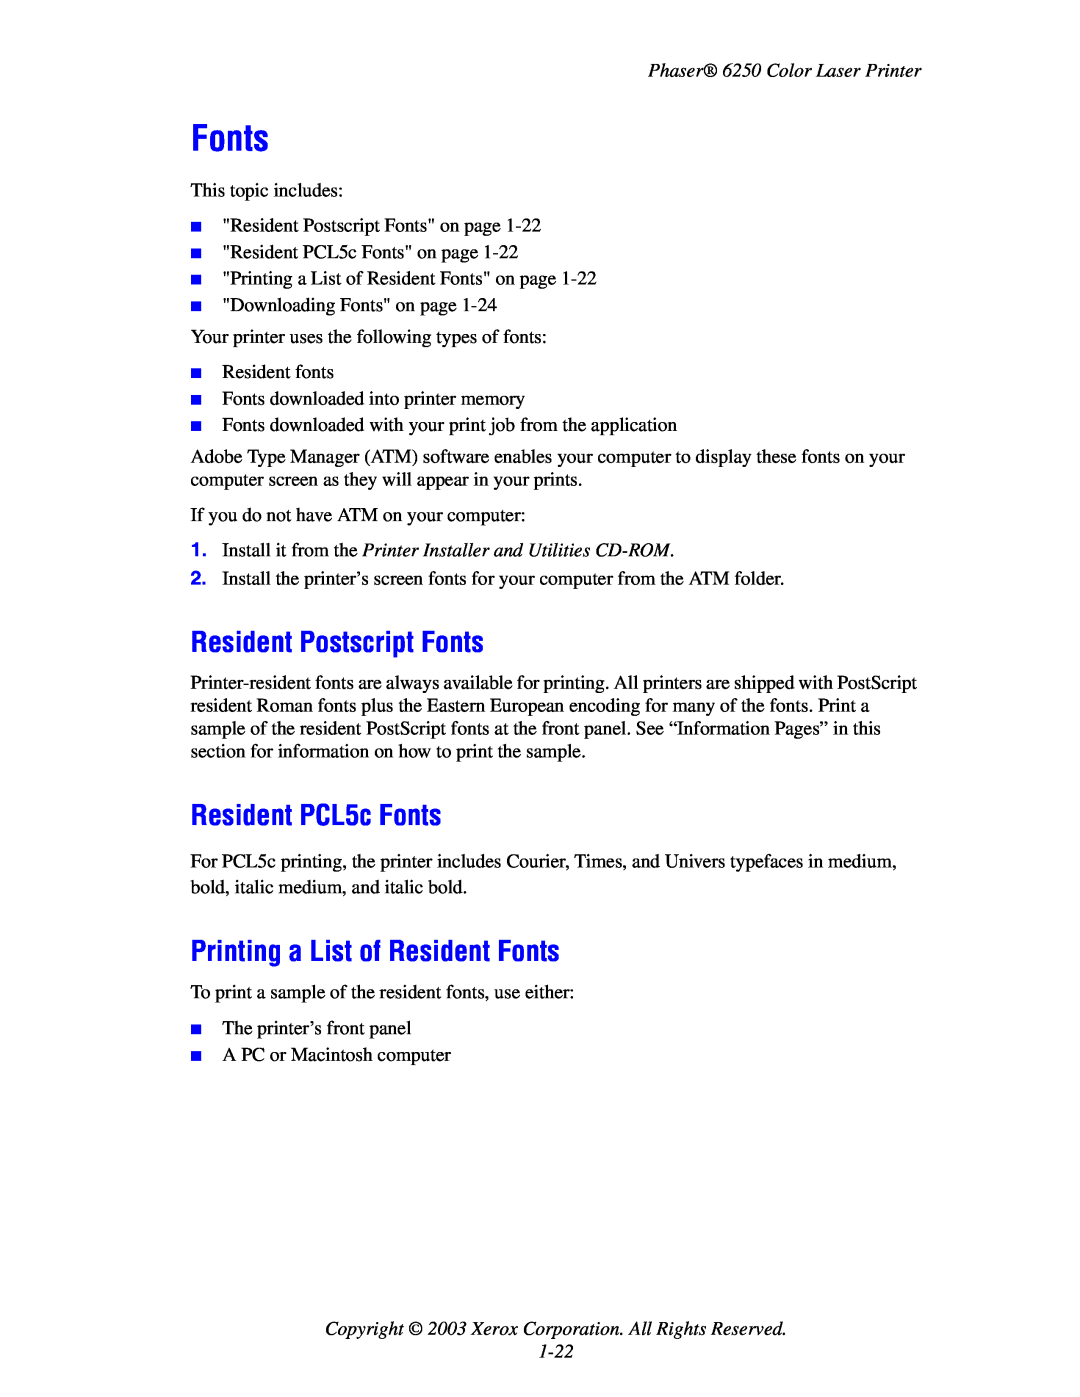 Xerox 6250 manual Resident Postscript Fonts, Resident PCL5c Fonts, Printing a List of Resident Fonts 